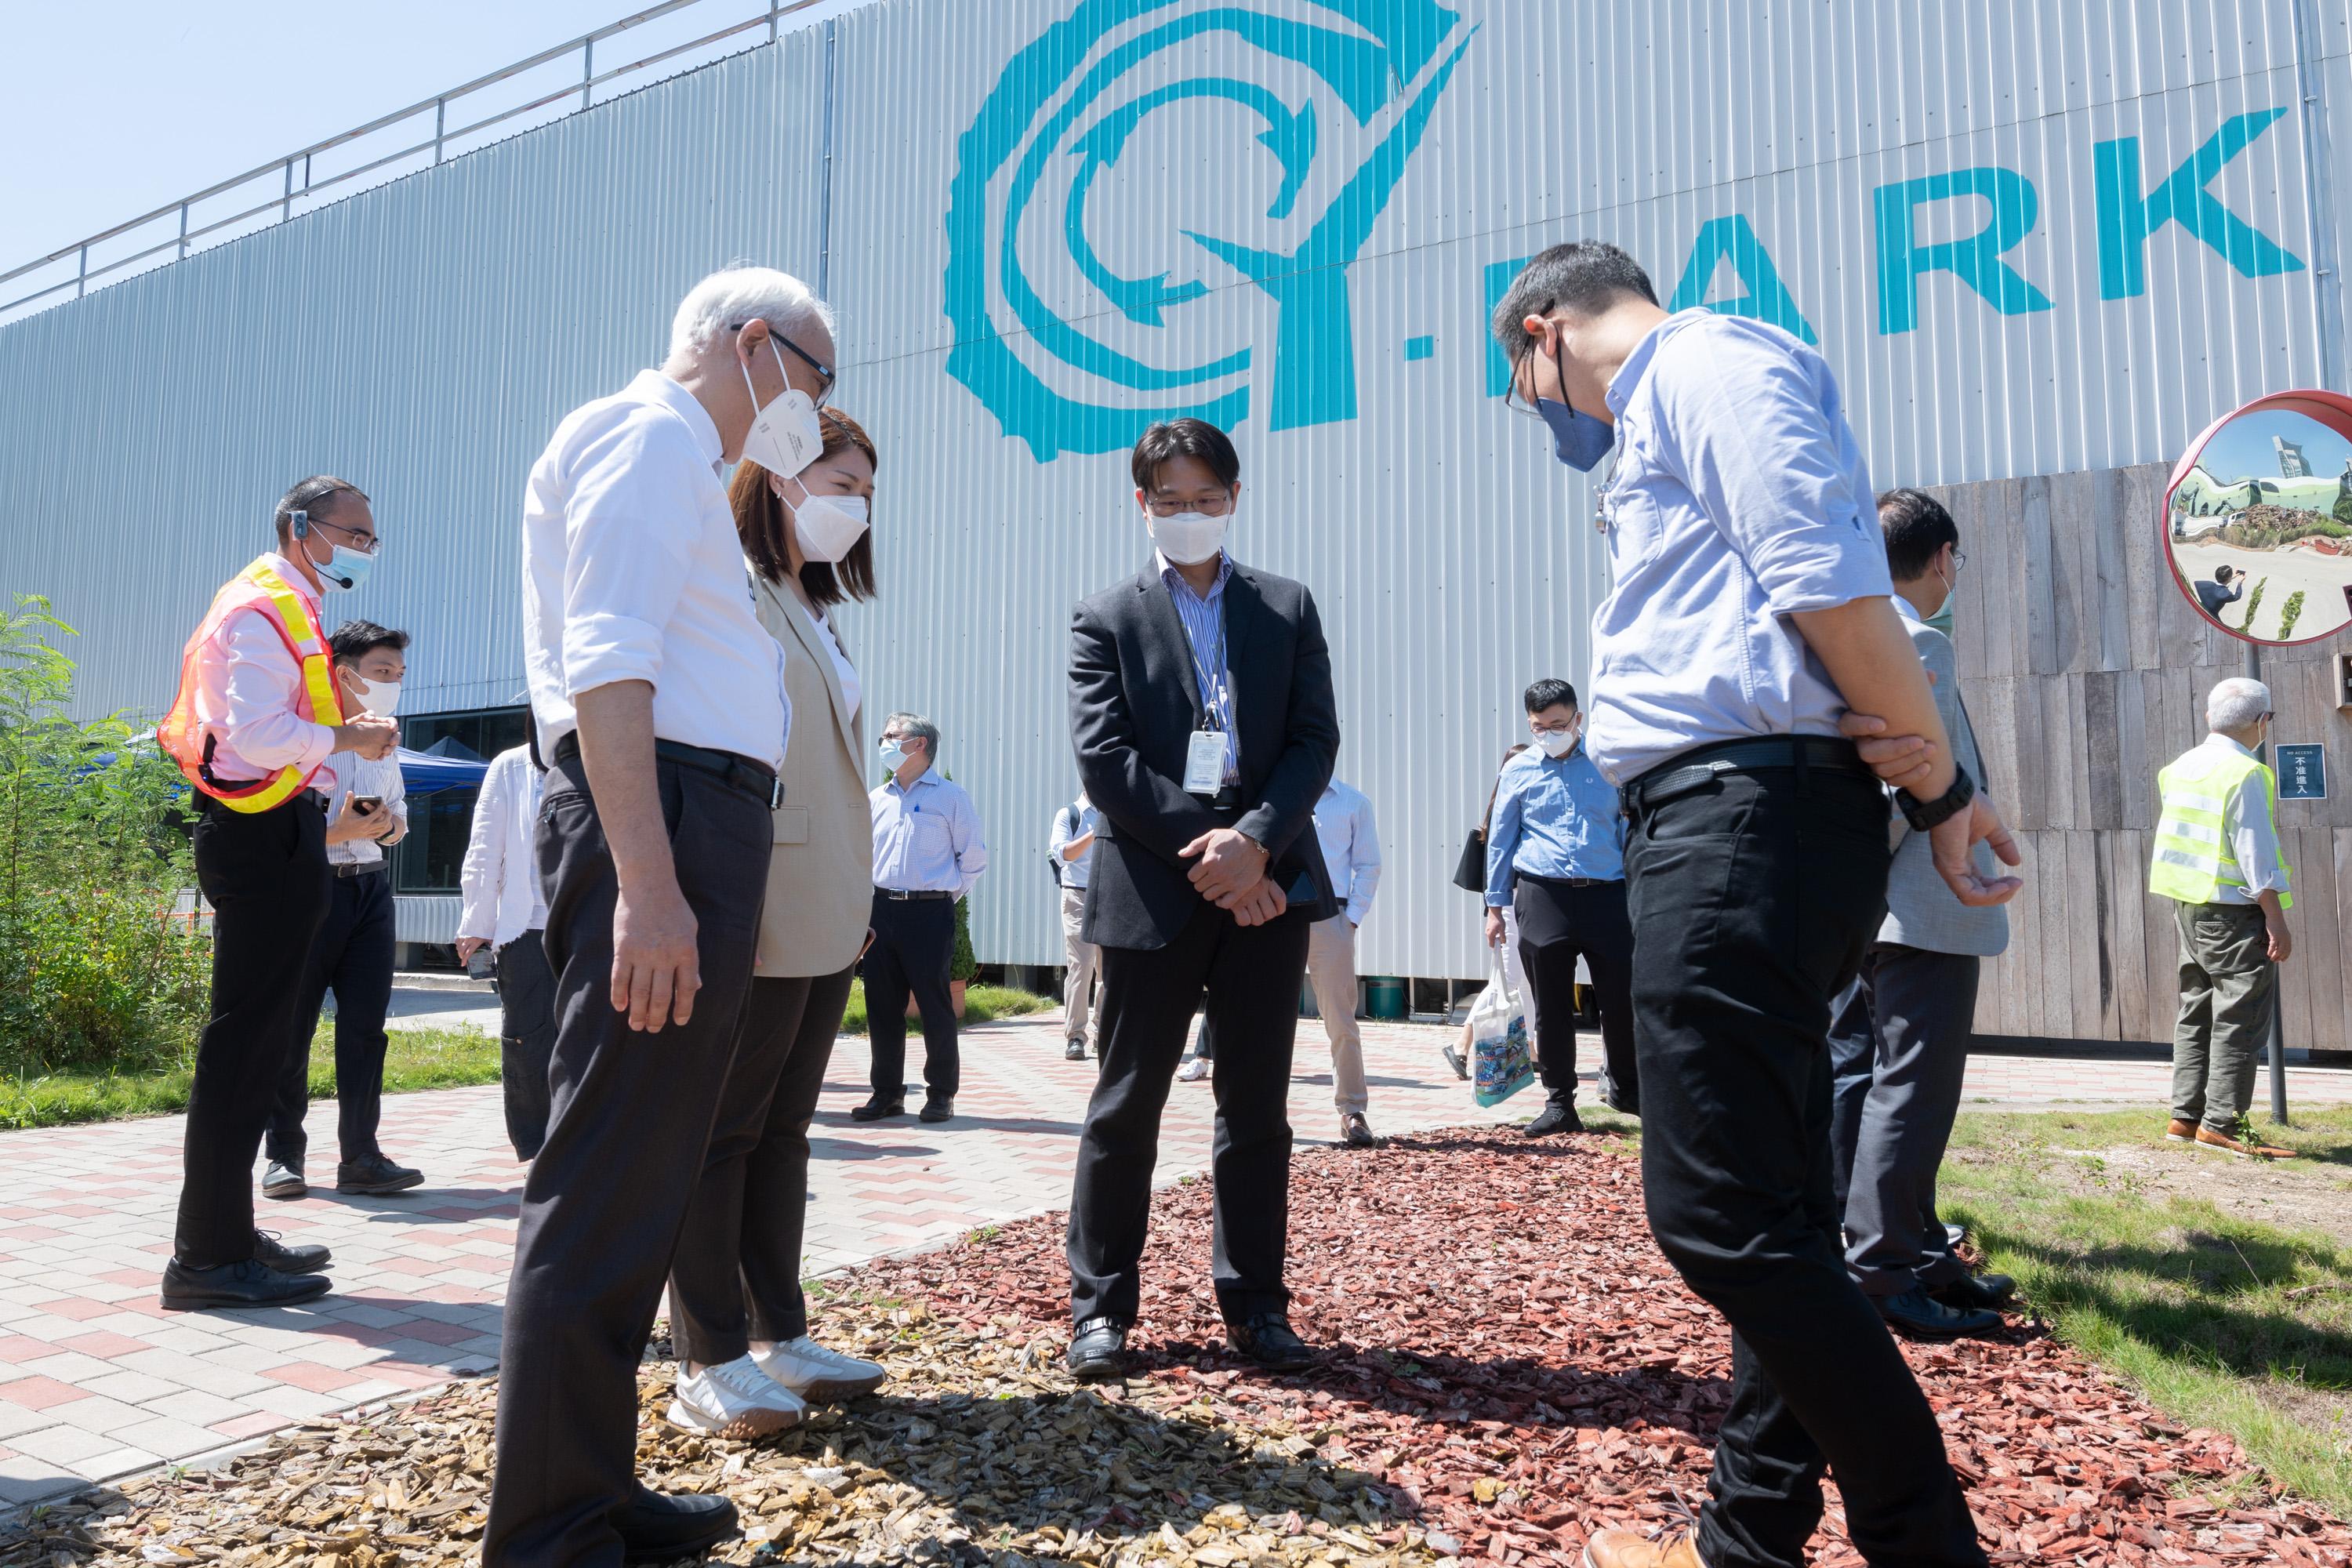 The Legislative Council Subcommittee to Study Policy Issues Relating to Municipal Solid Waste Charging, Recovery and Recycling today (October 13) visited Y·PARK in Tsang Tsui, Tuen Mun, to gain a better understanding on the details of converting yard waste into useful materials.